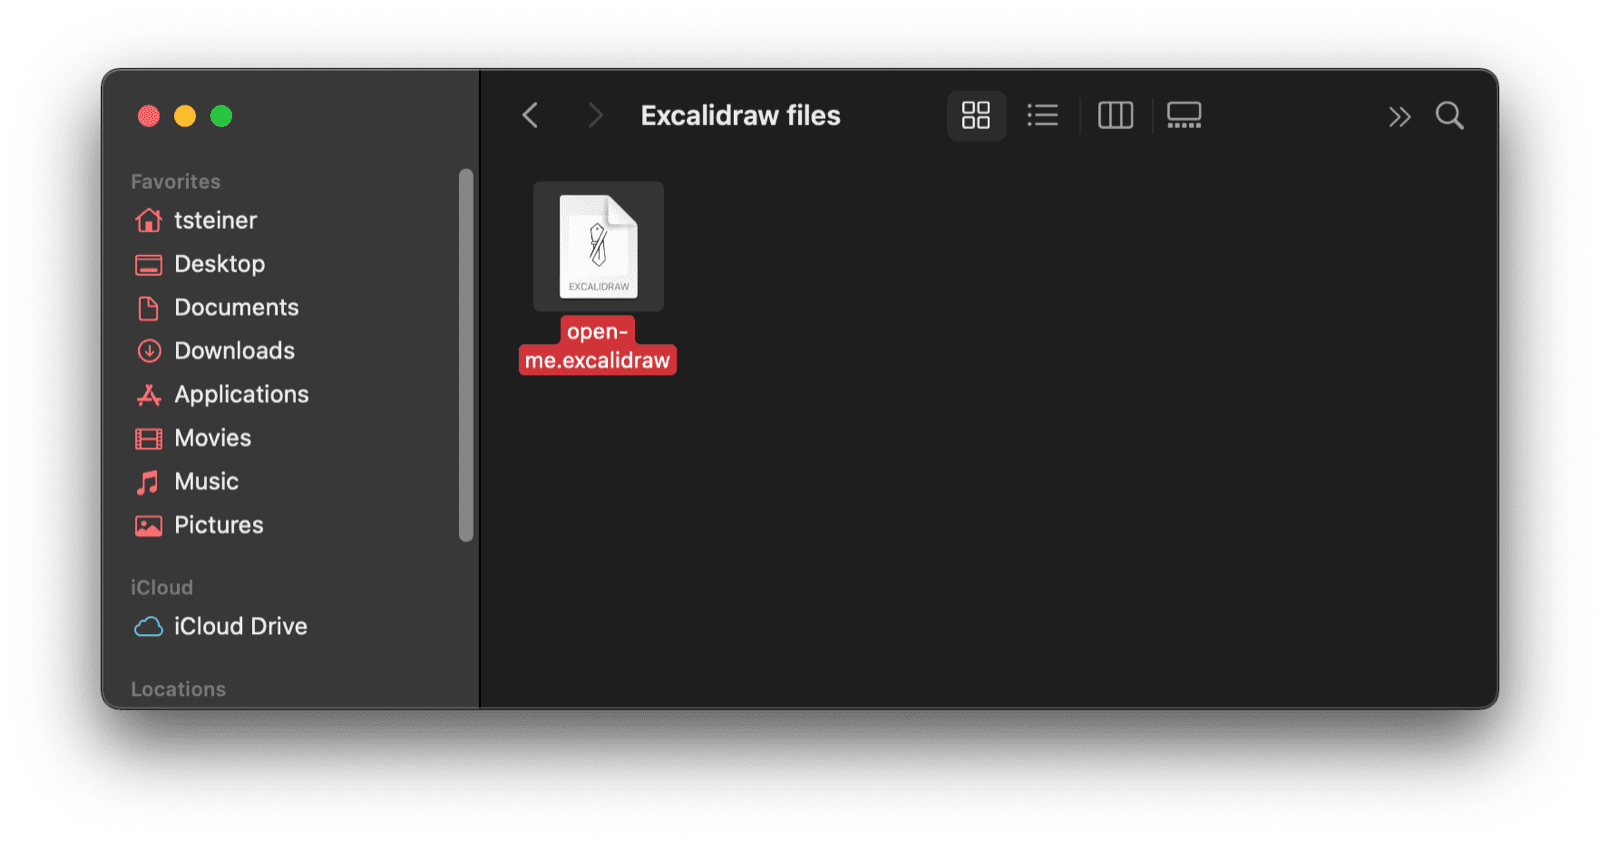 The macOS finder window with an Excalidraw file.